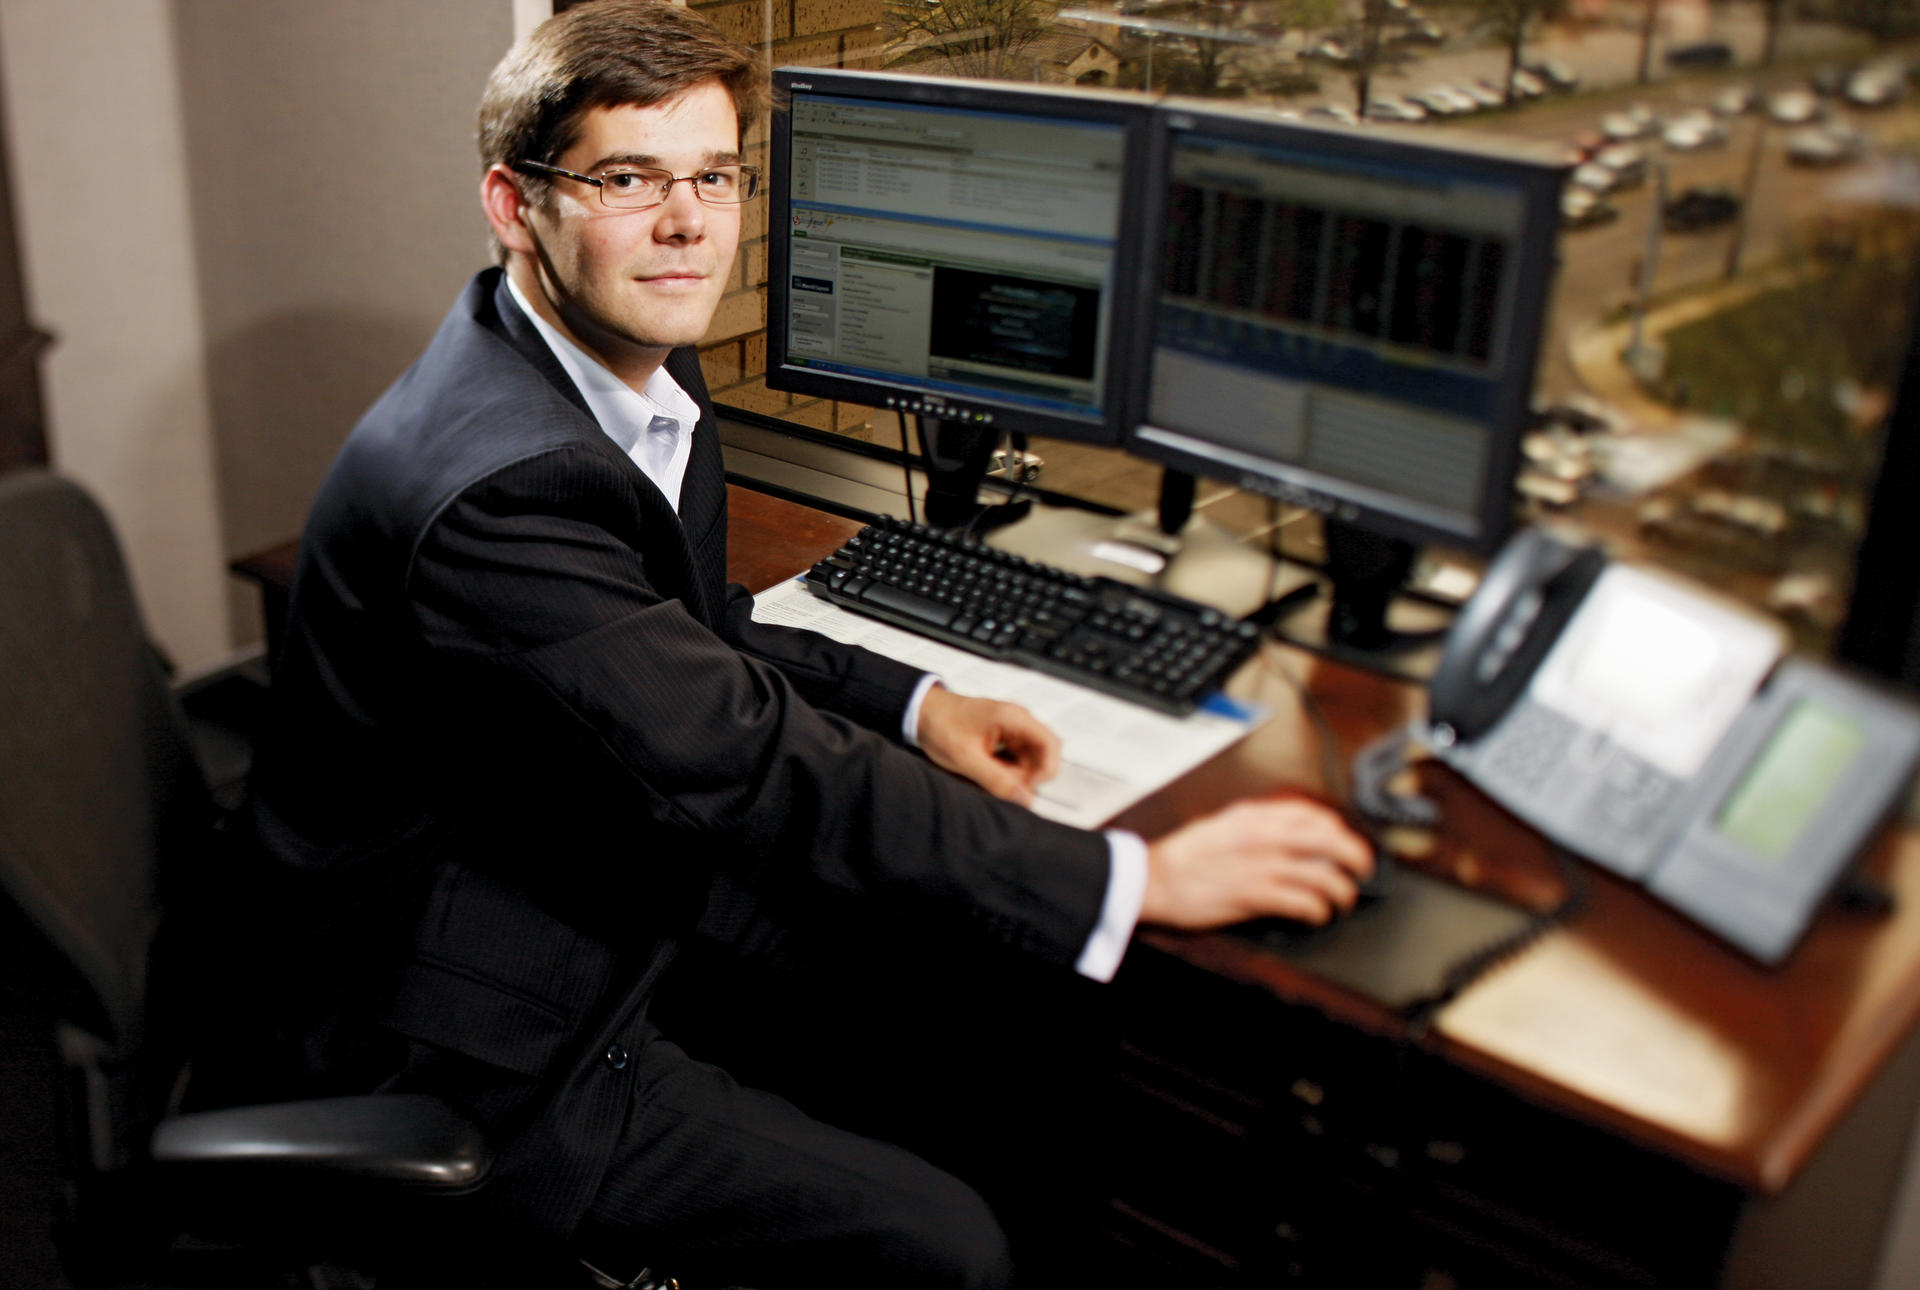 A young man in a suit sits at a computer, looking back at the camera.